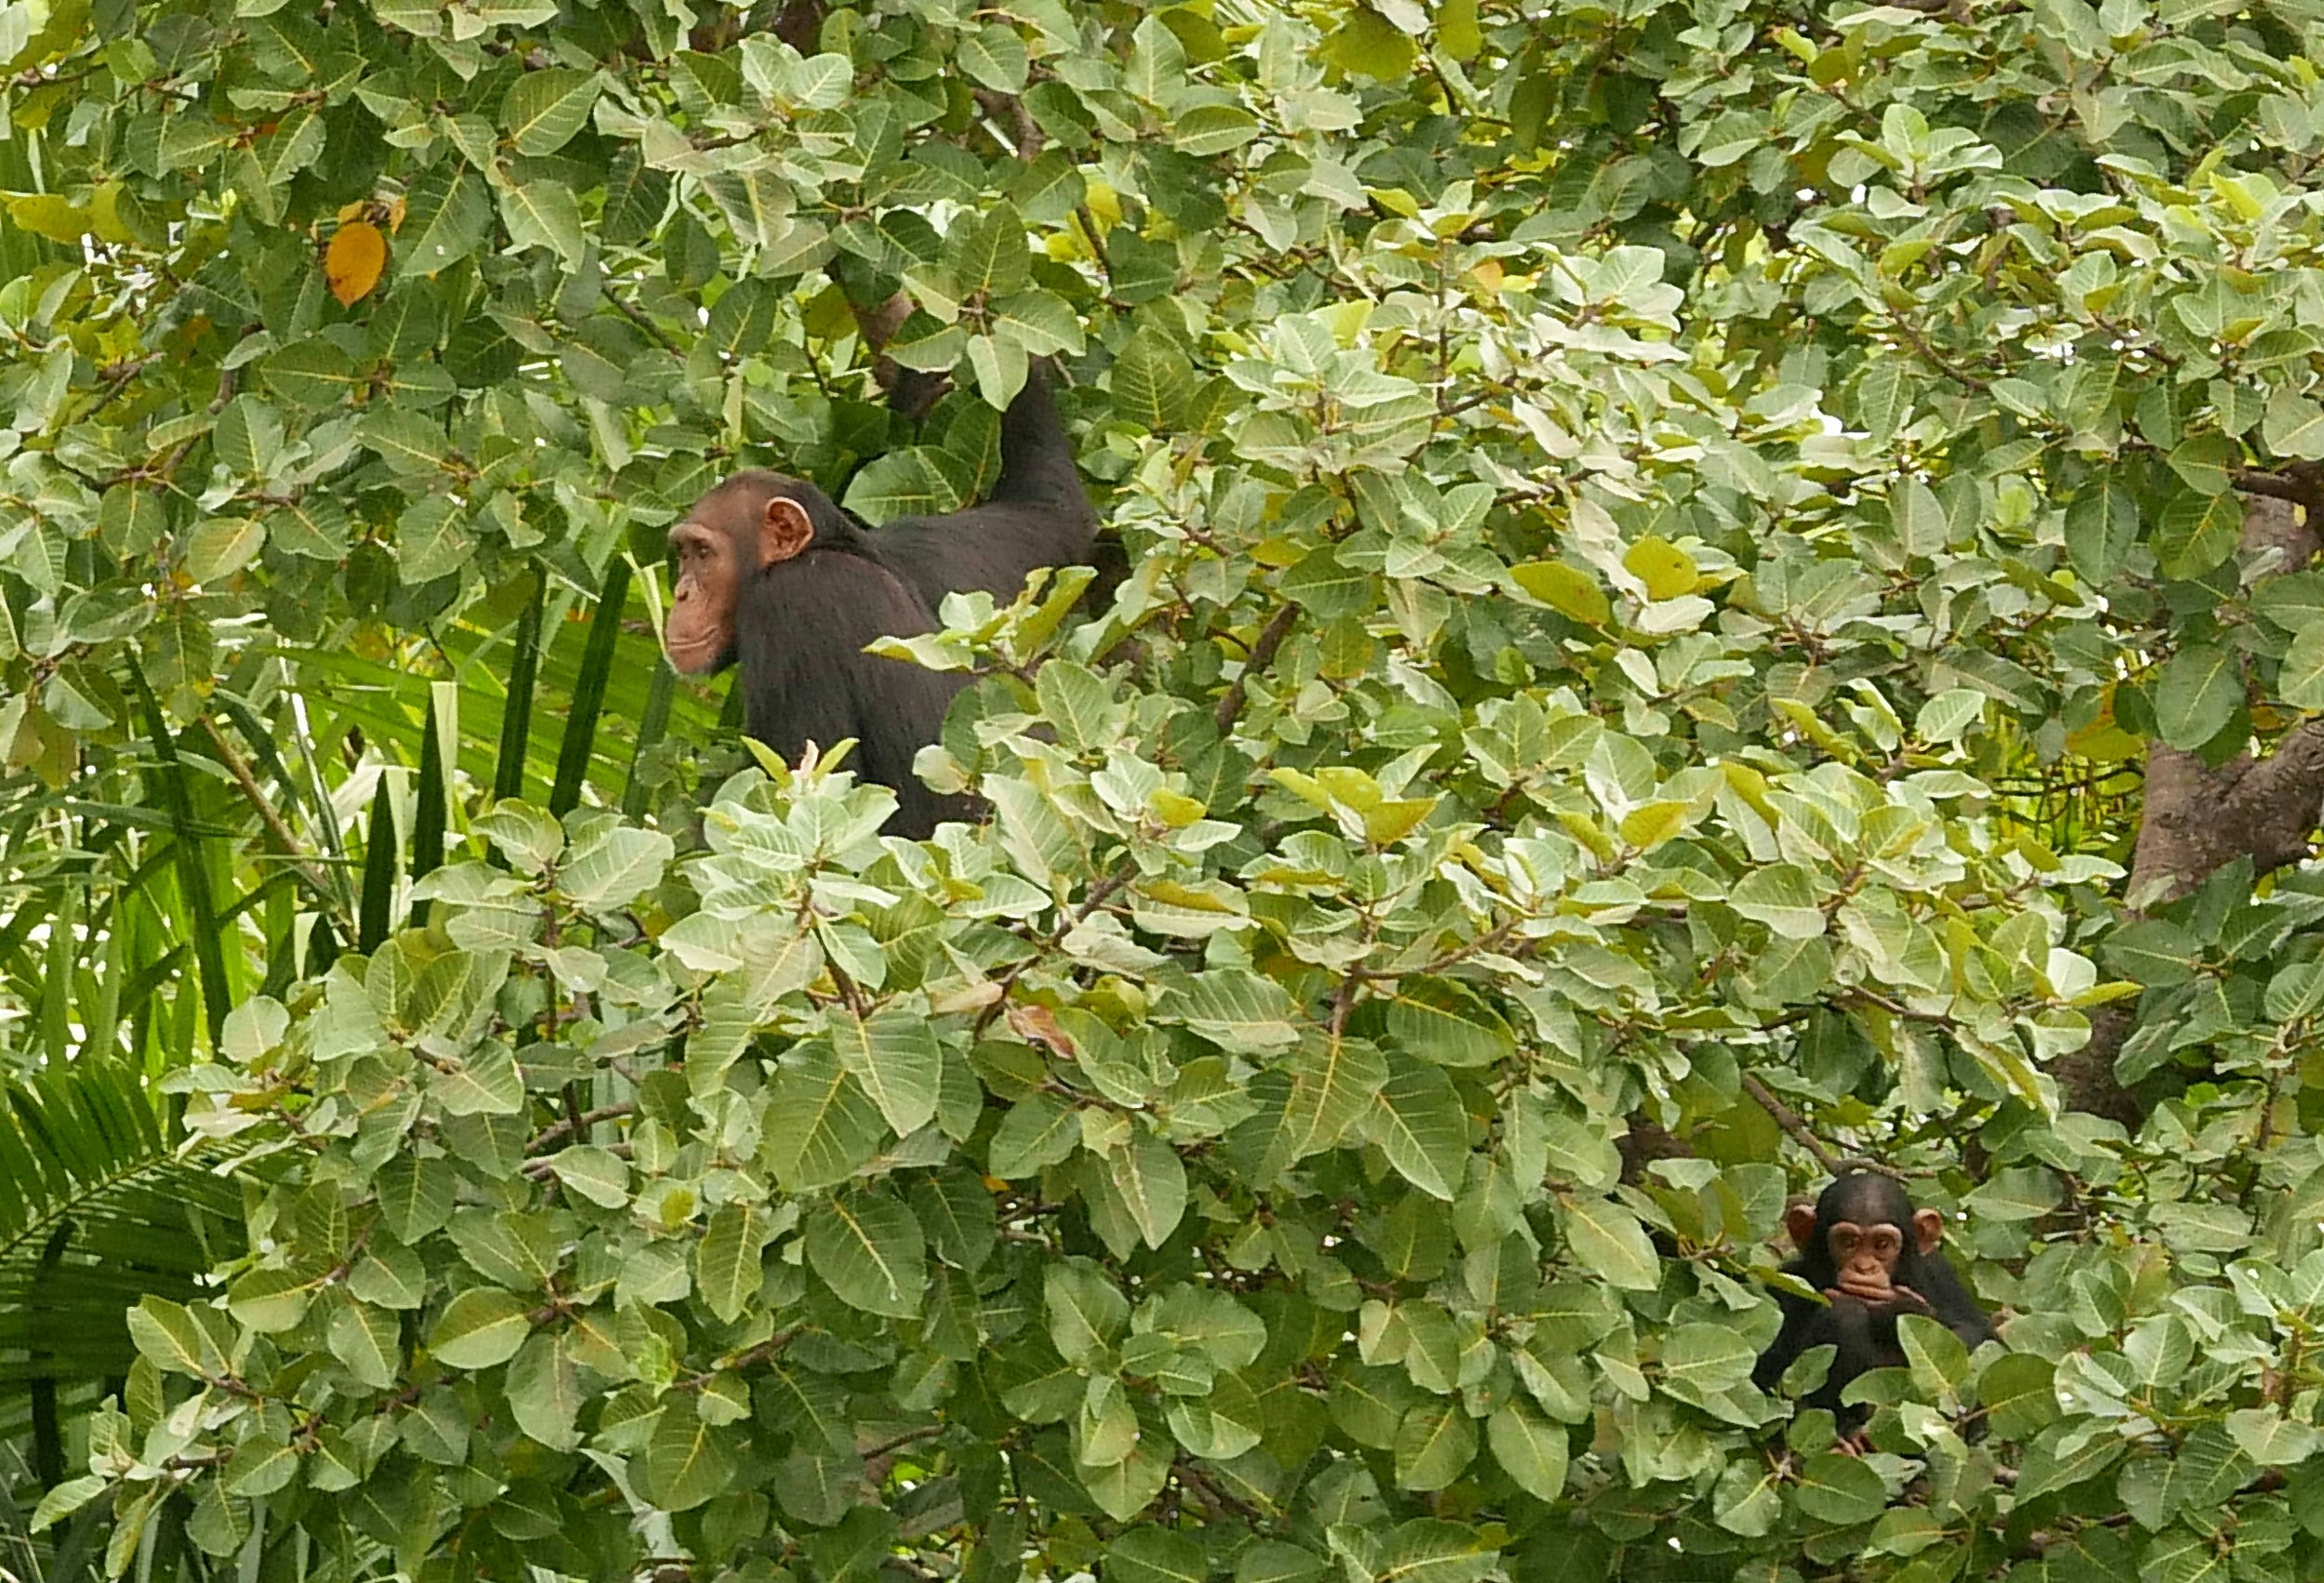 A wall of foliage dominates the image, with an elder chimpanzee visible in the top left, and a baby chimp poking out in the bottom right.